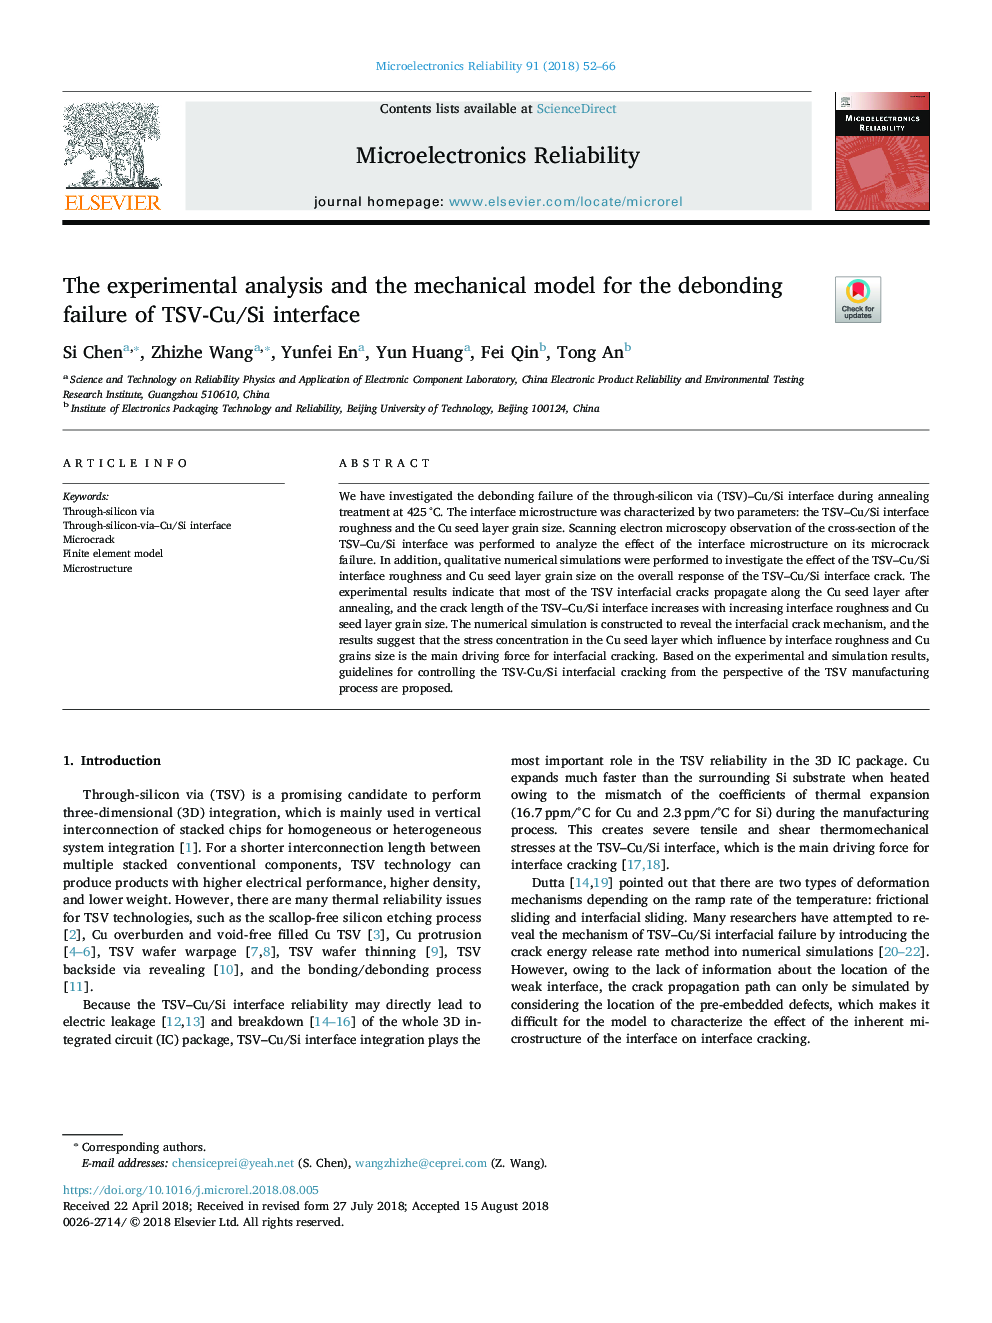 The experimental analysis and the mechanical model for the debonding failure of TSV-Cu/Si interface